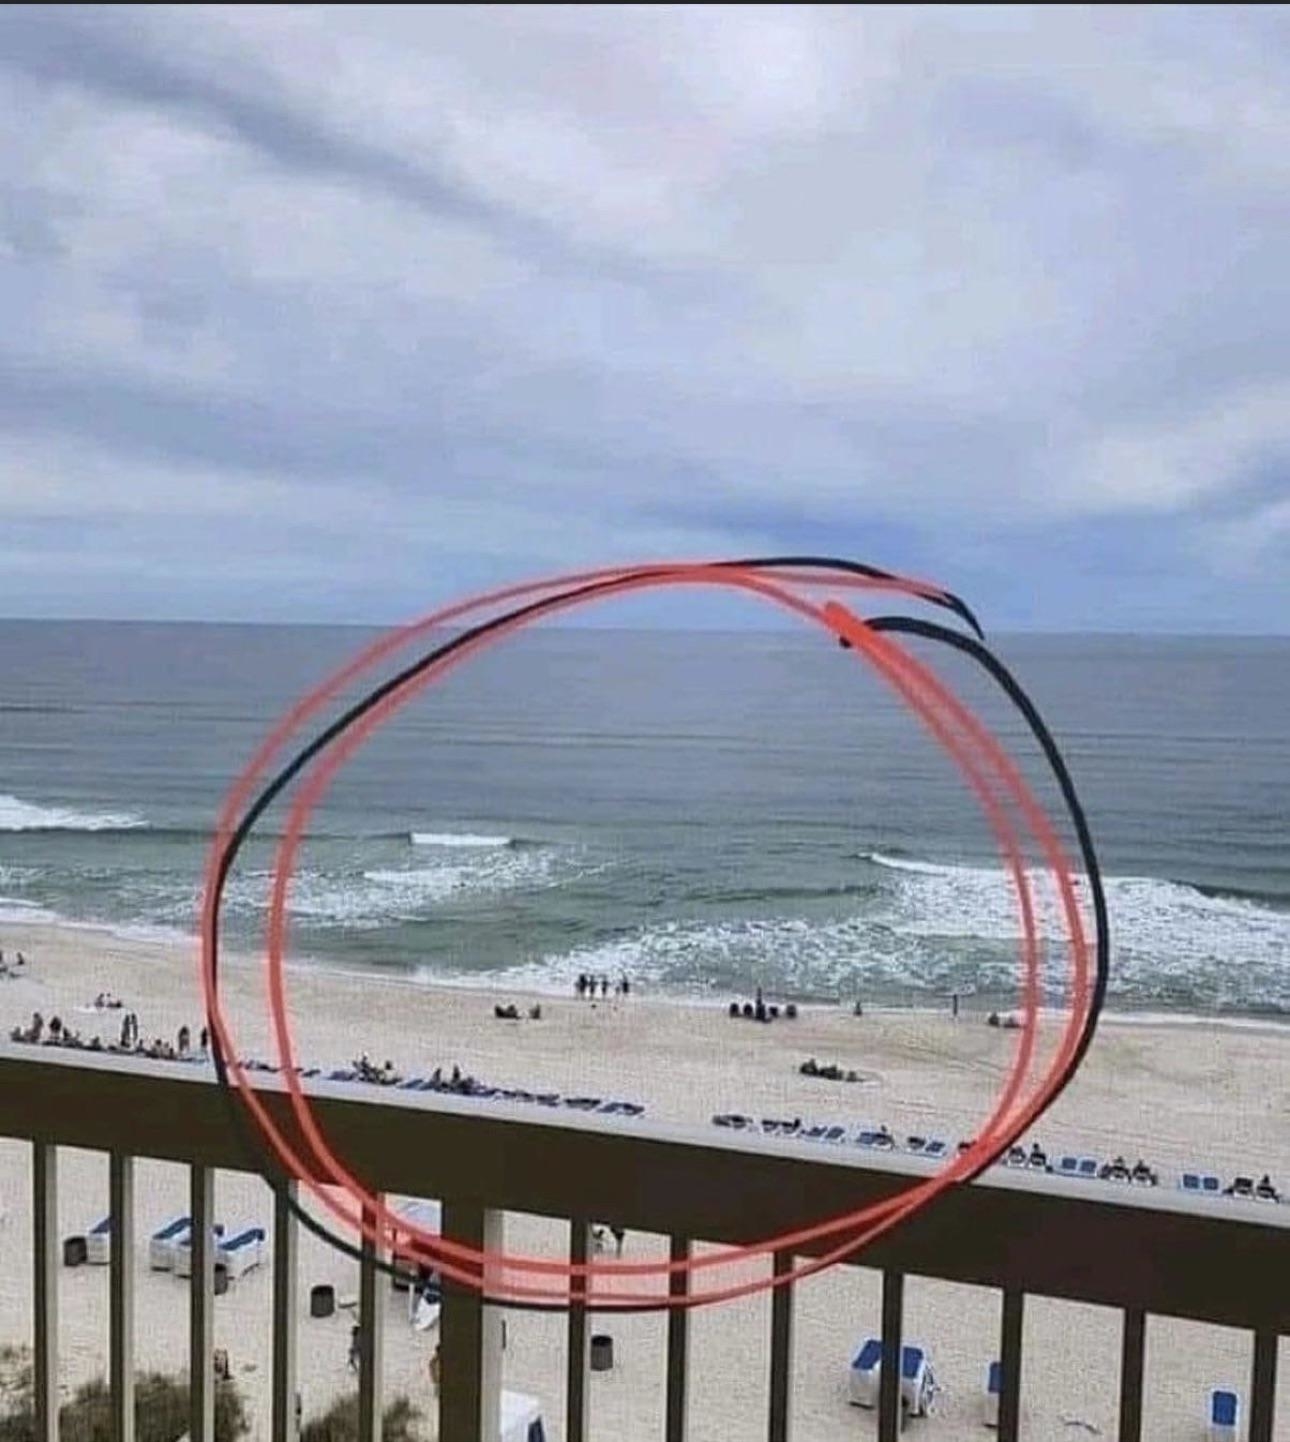 A rip current at the beach